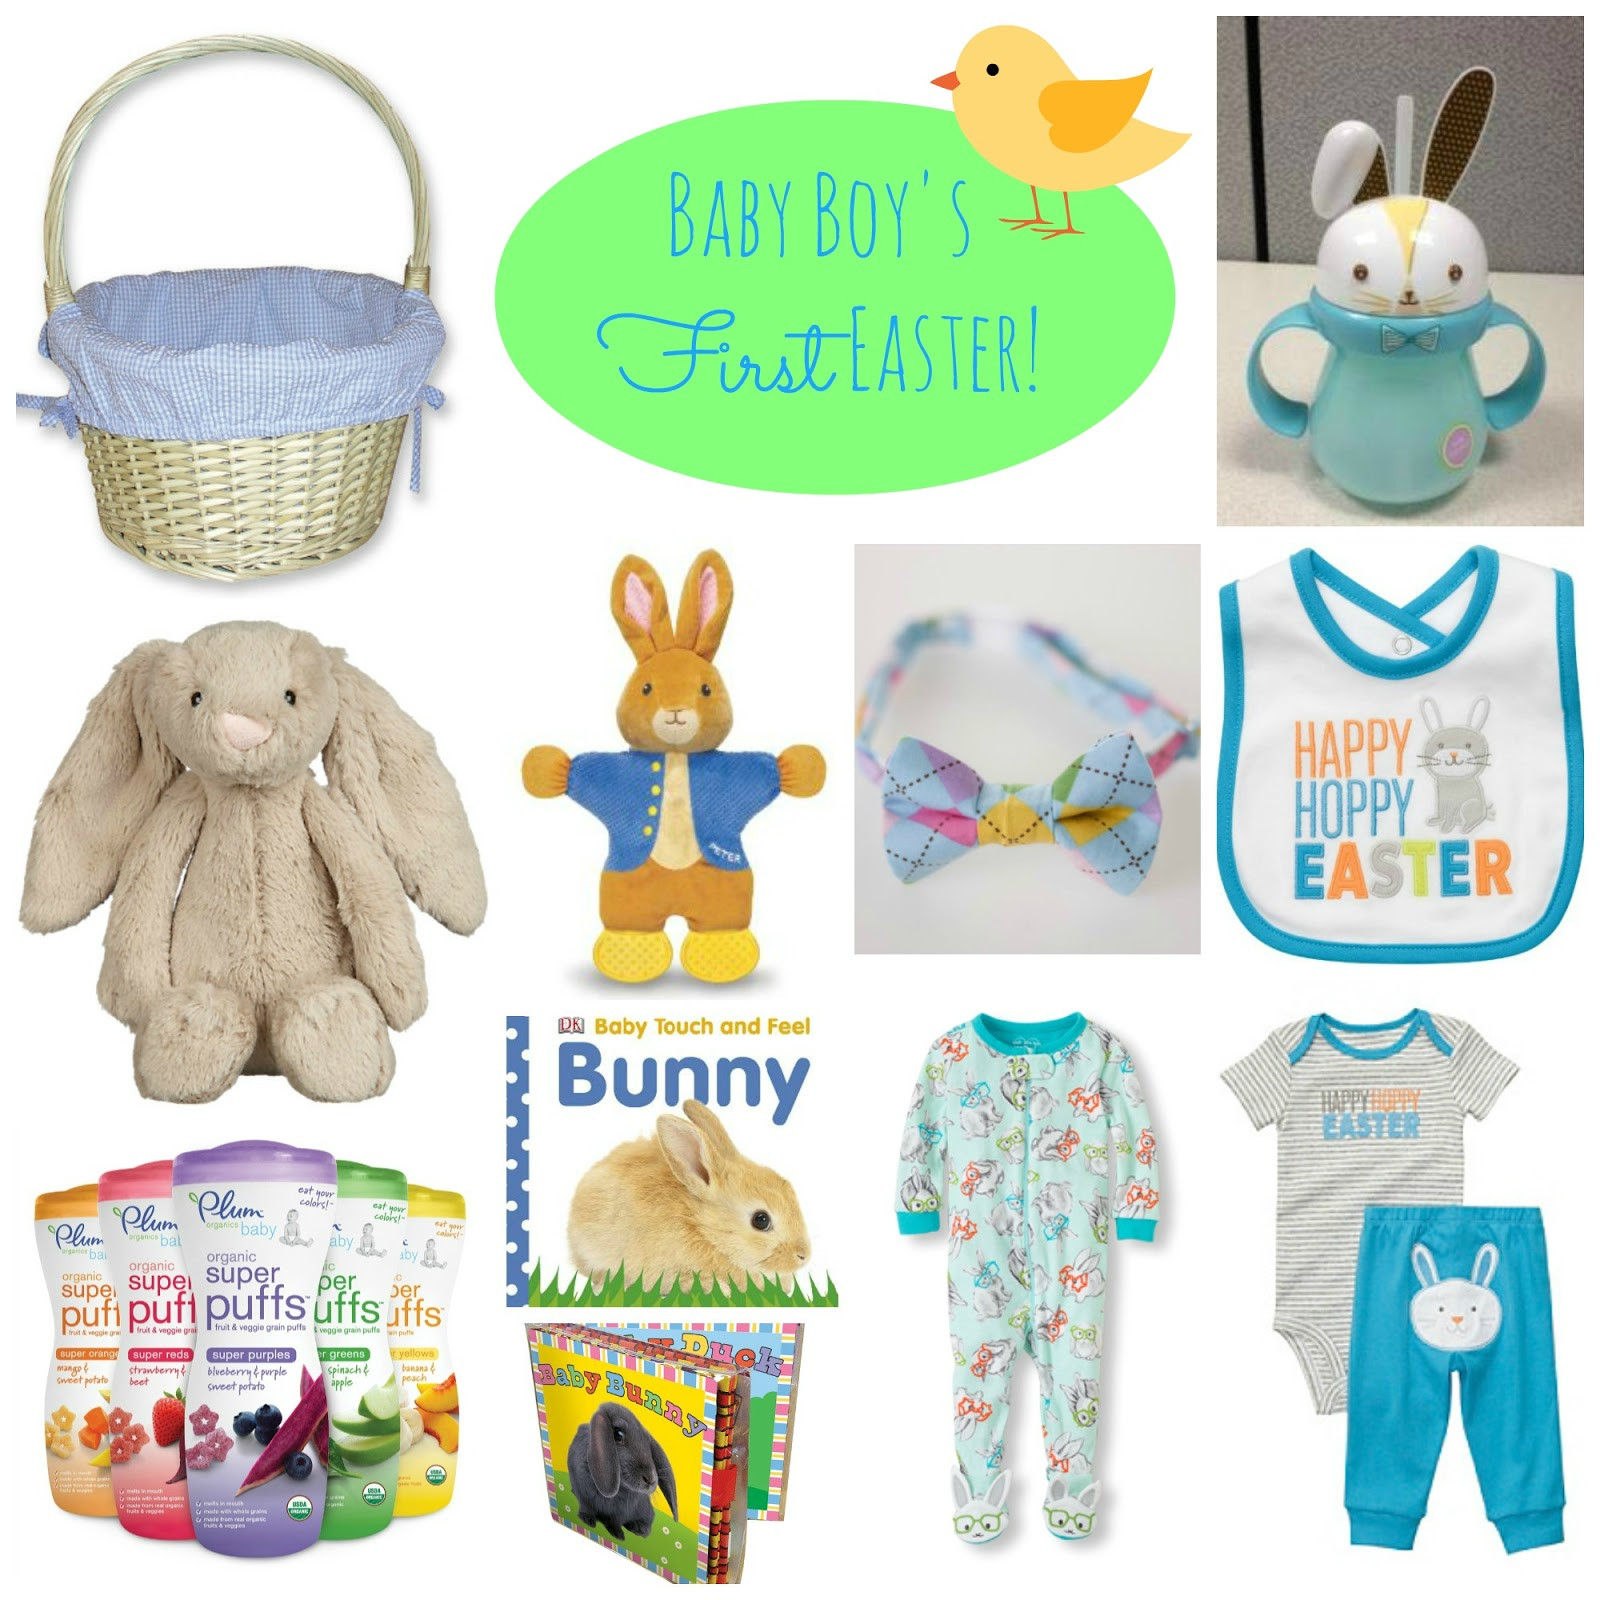 Ideas For Baby Easter Basket
 Simple Suburbia Baby s First Easter Basket Ideas